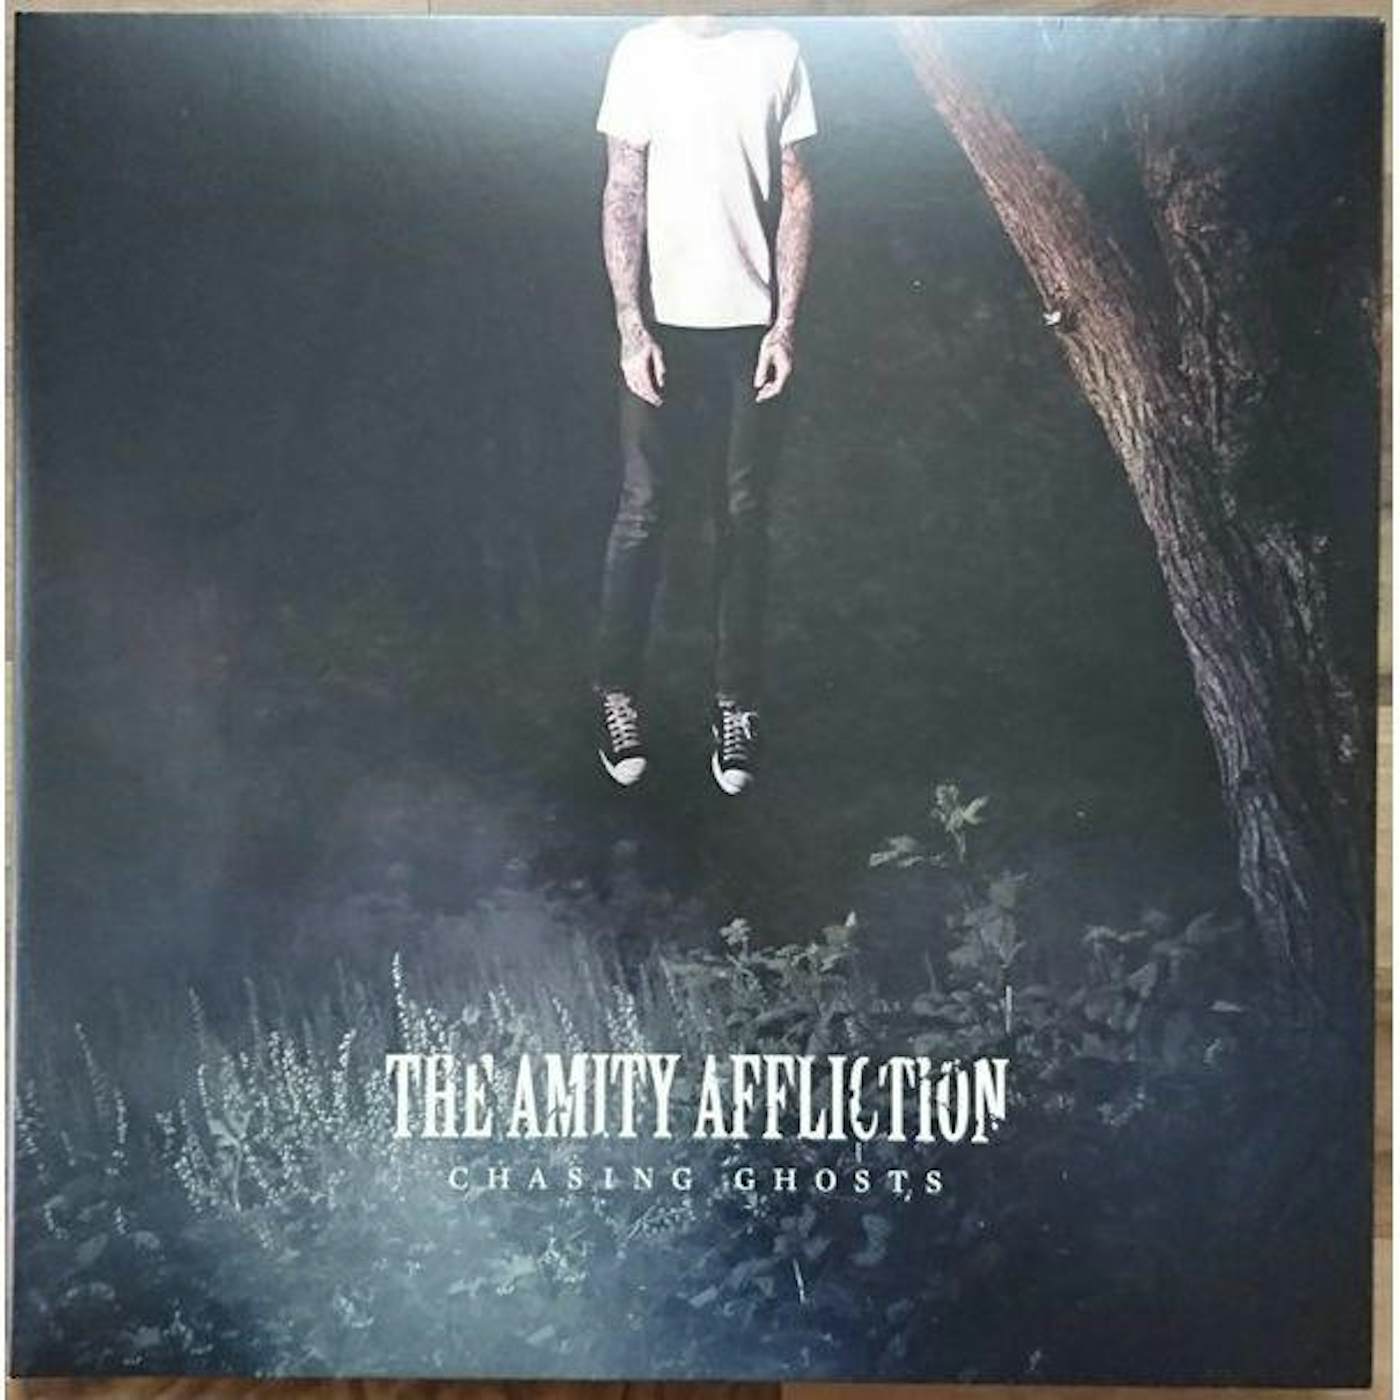 The Amity Affliction Chasing Ghosts Vinyl Record